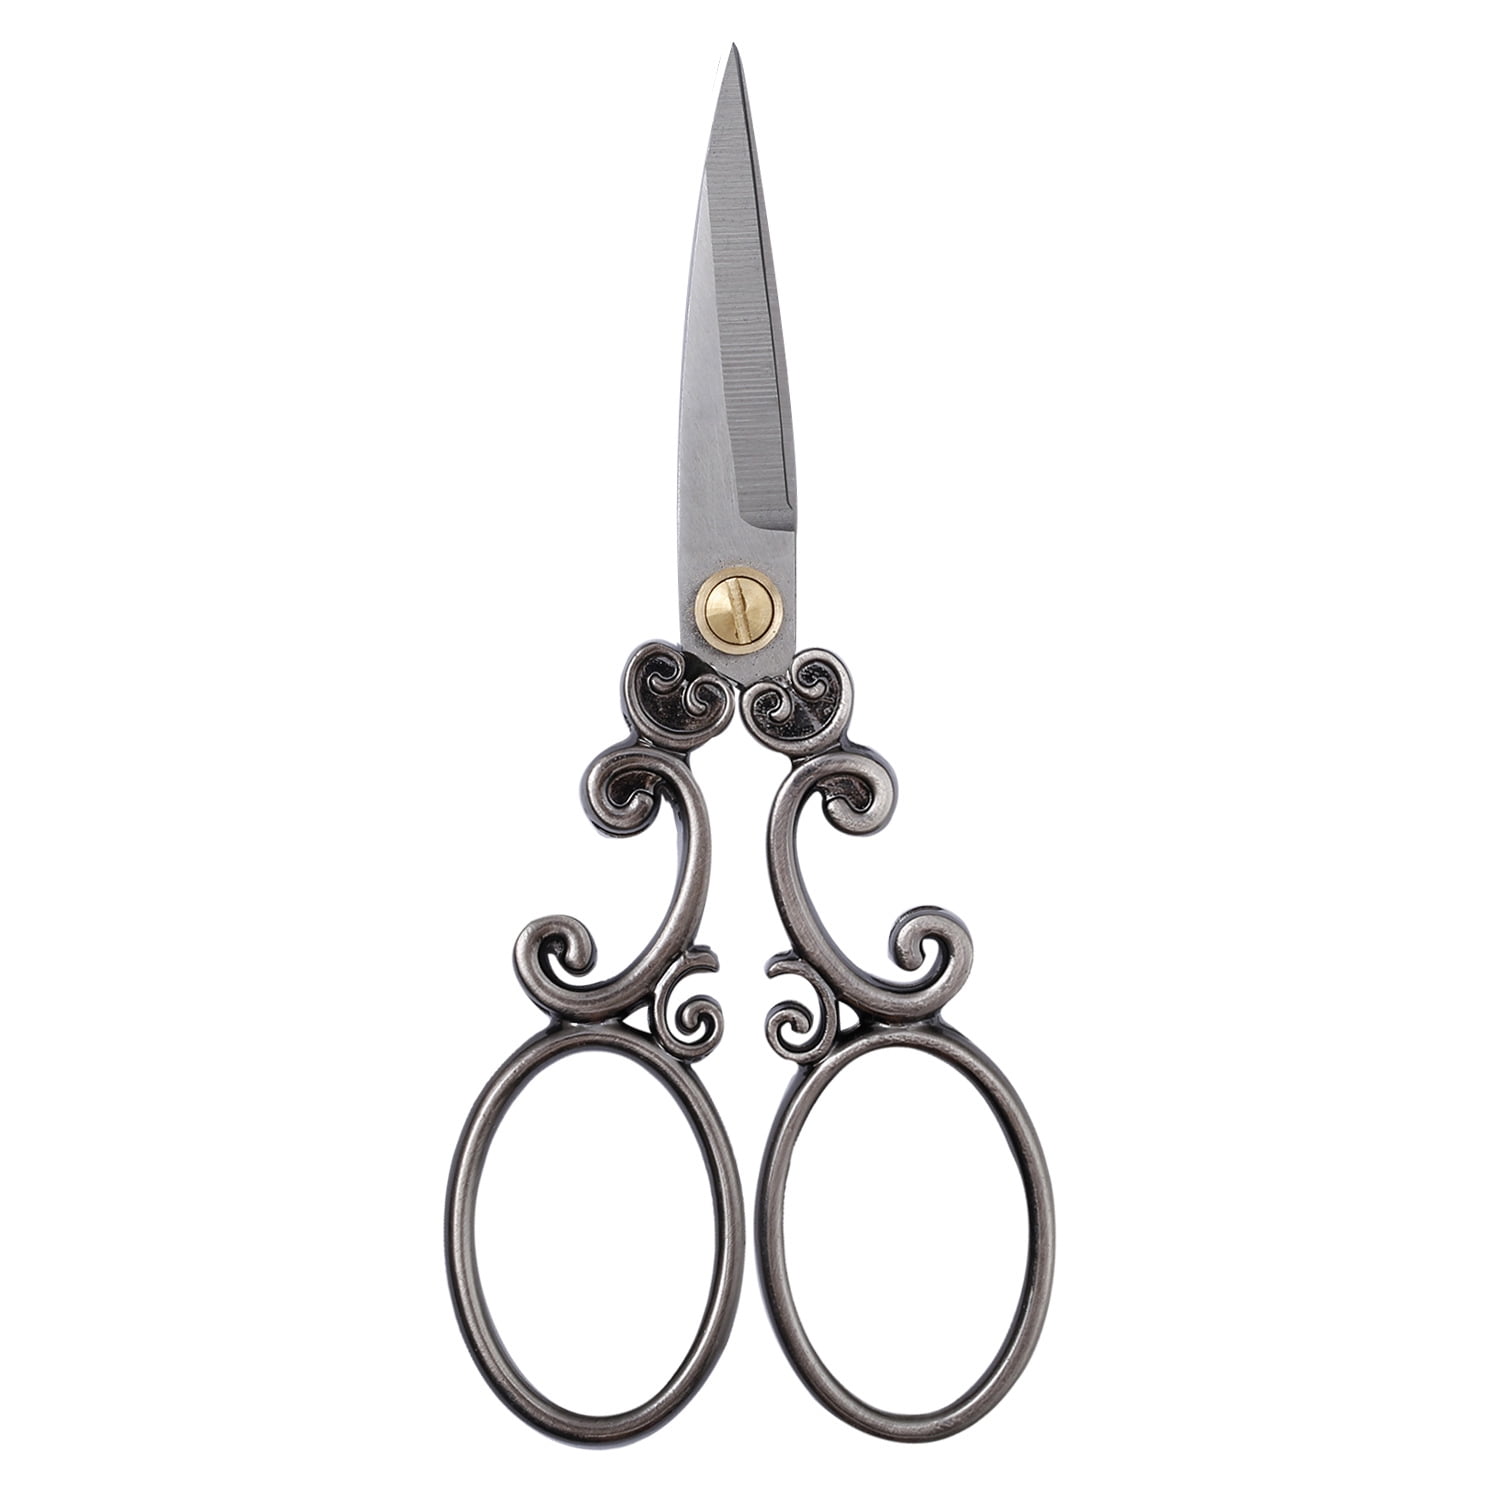 Vintage Stainless Steel Scissors for Embroidery Sewing DIY Art Work Cutting Tool 